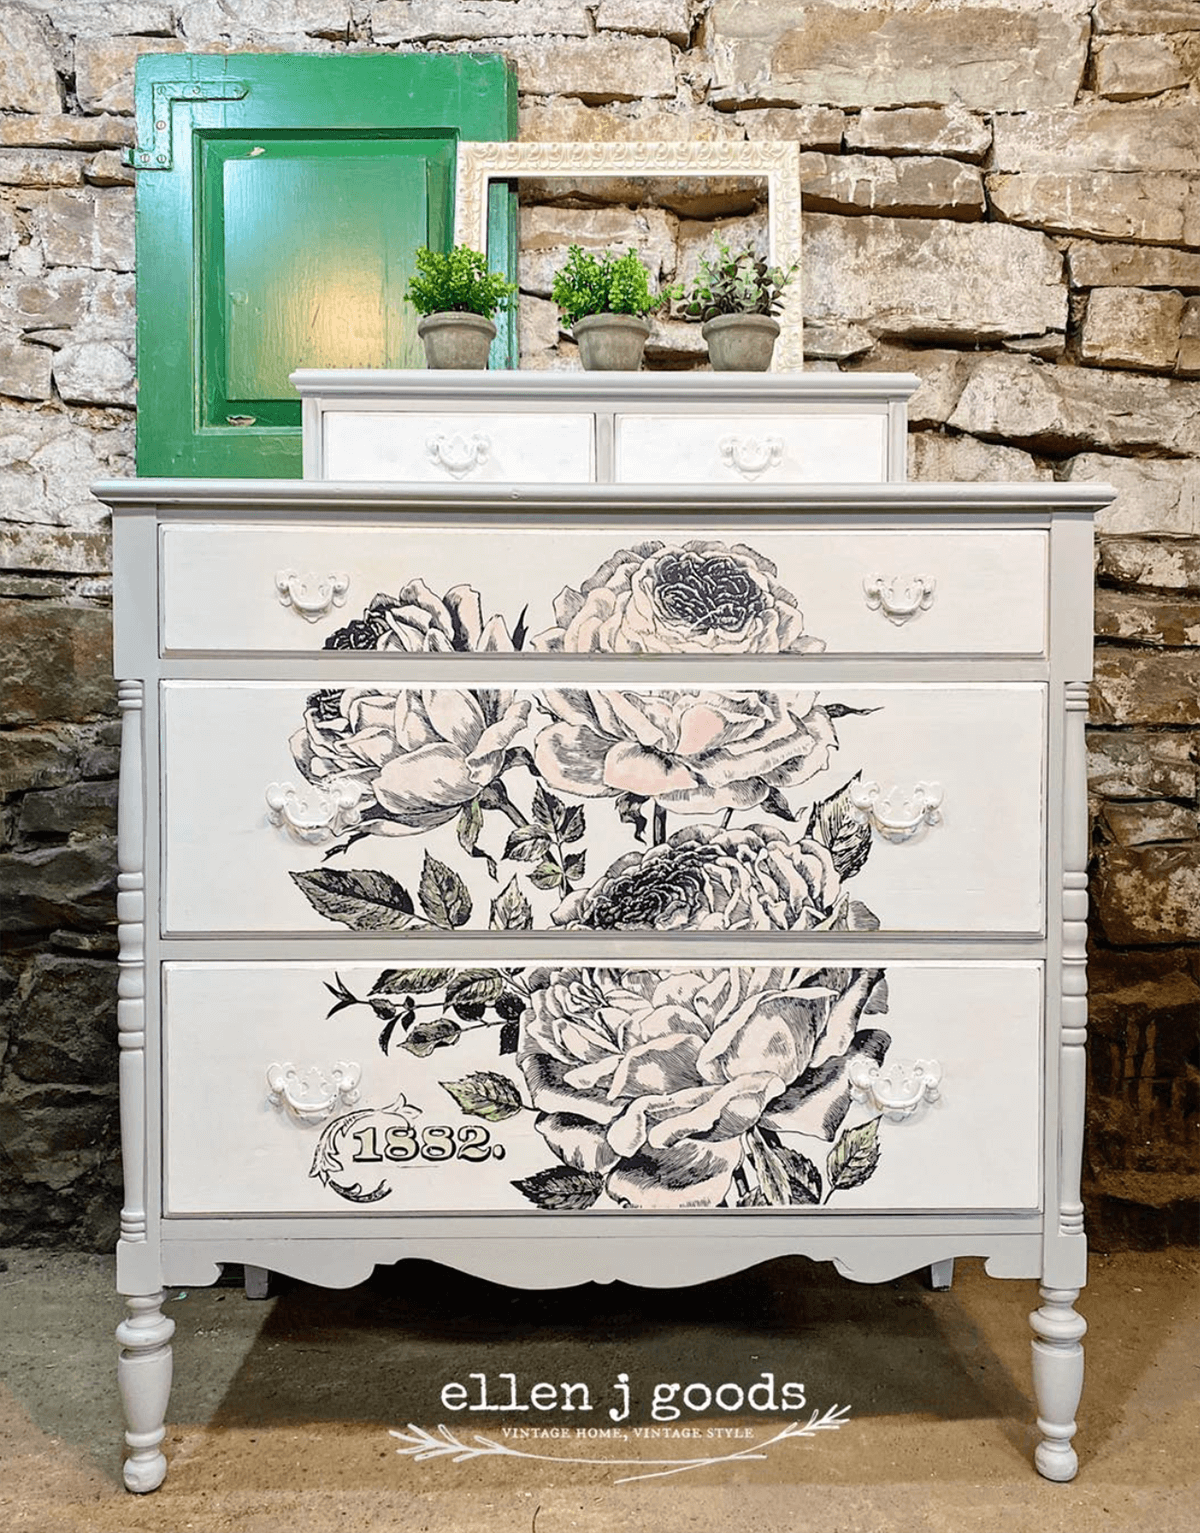 Boho Chic Vintage with Floral Print Drawers